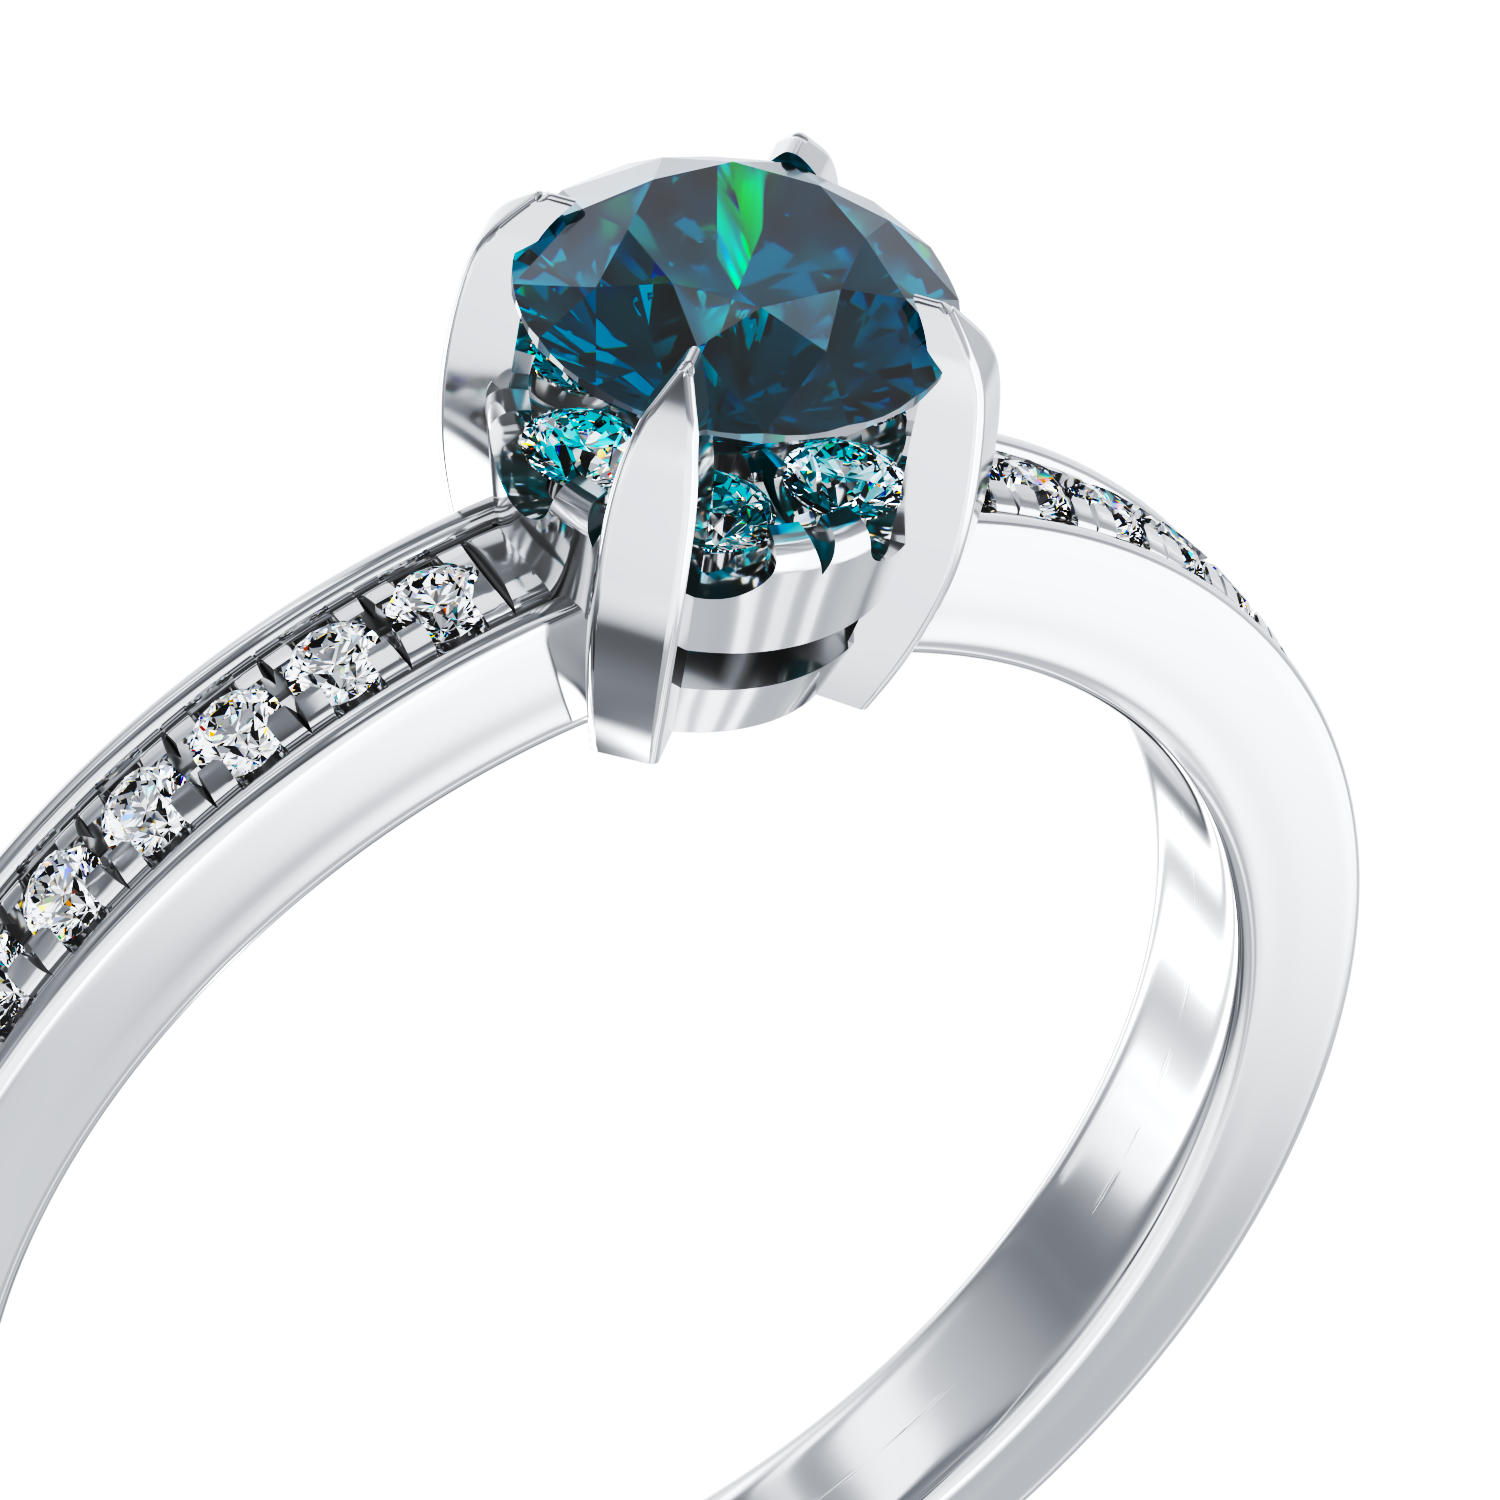 18K white gold engagement ring with 0.51ct blue diamond and 0.2ct diamonds